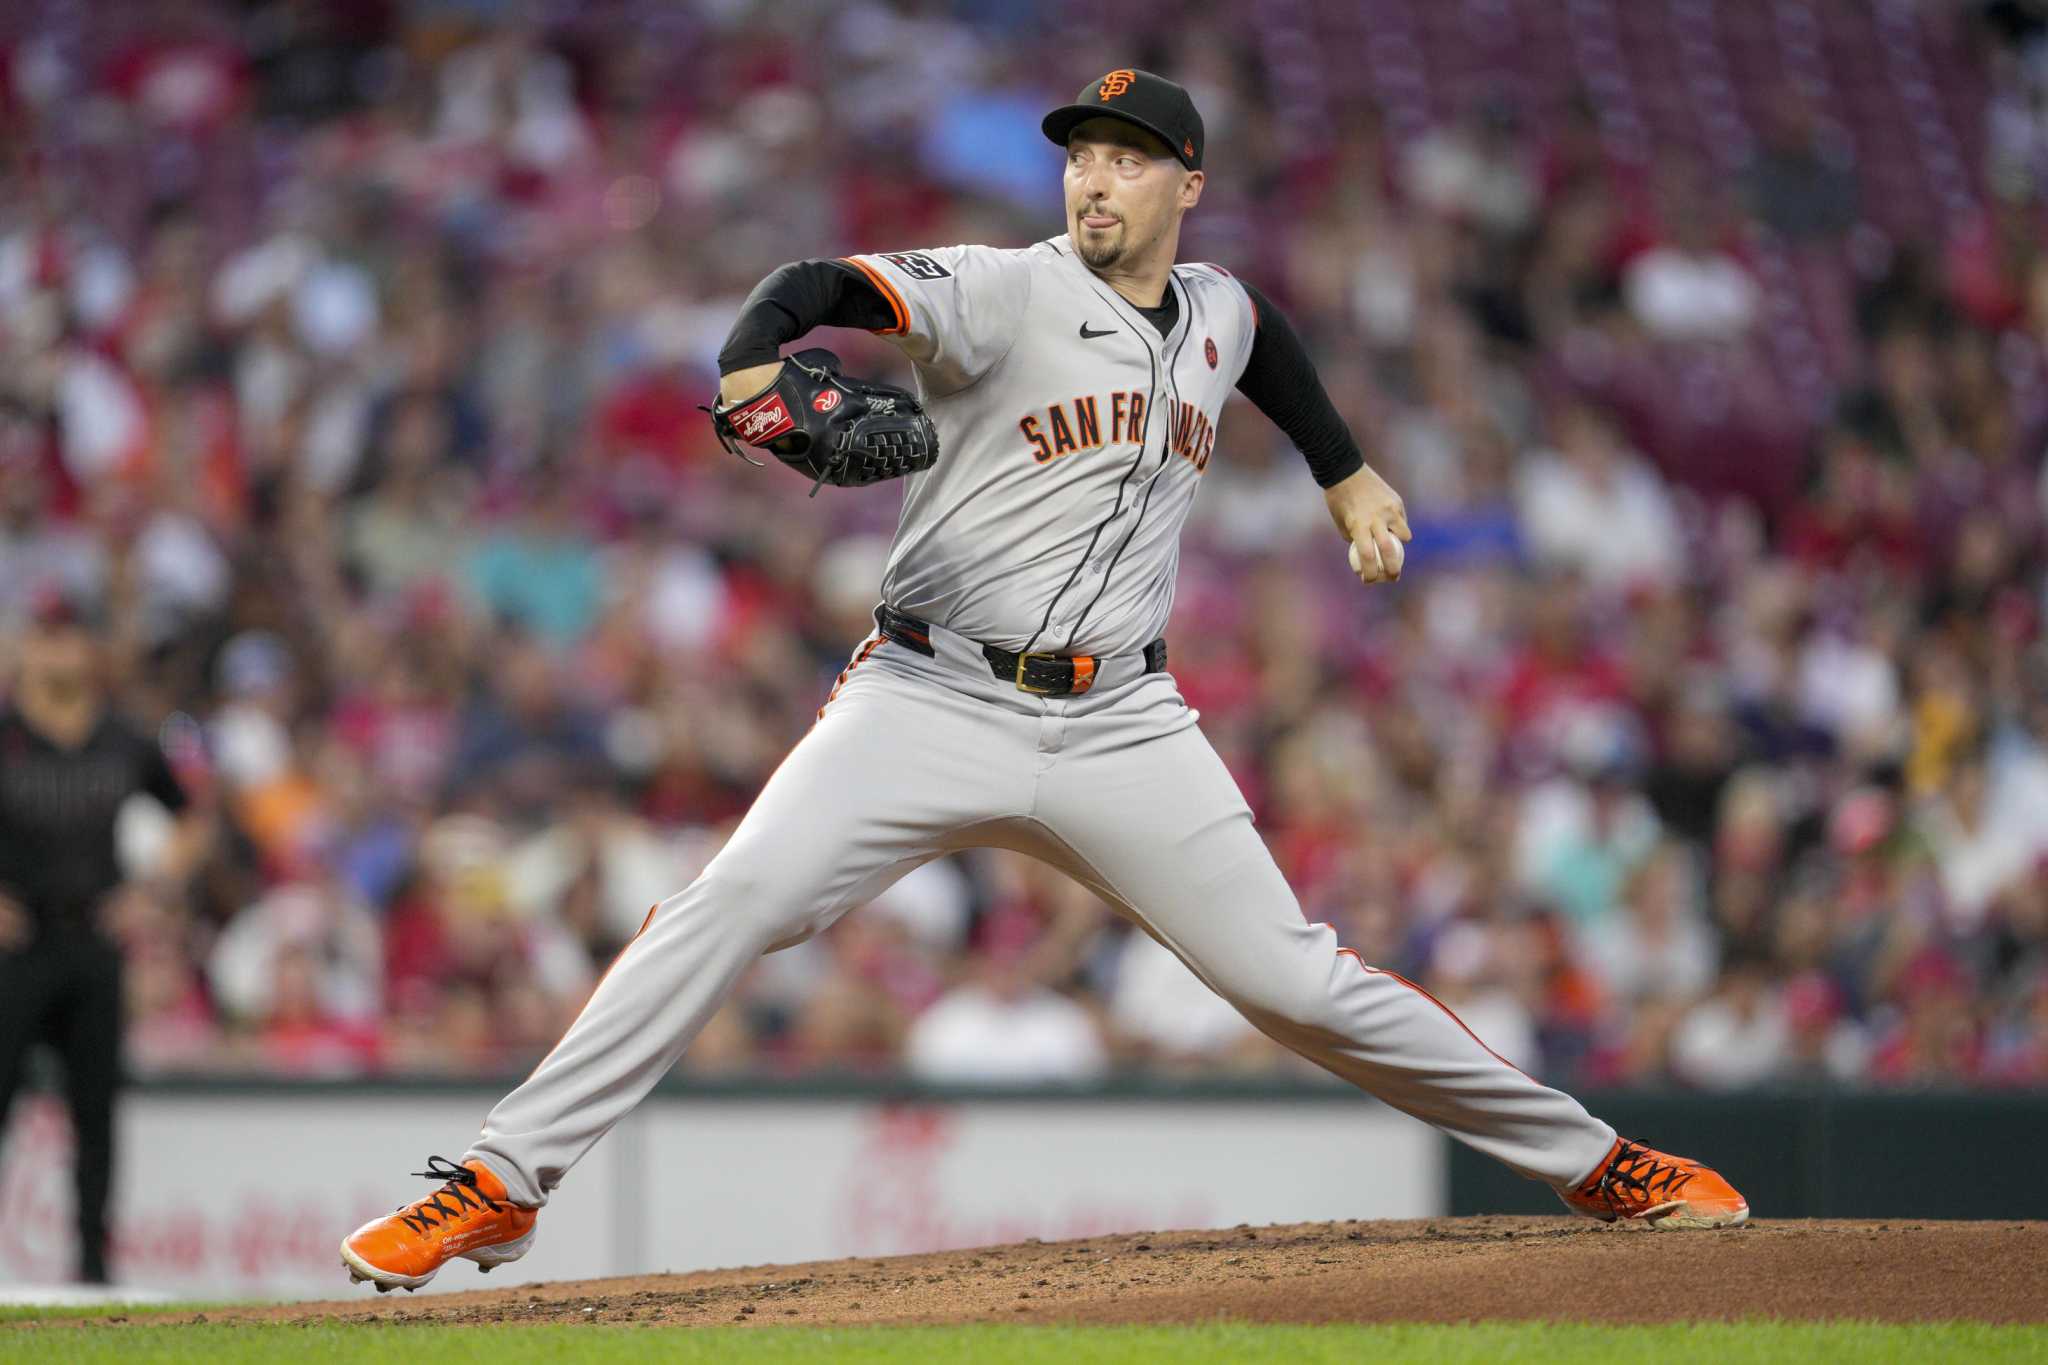 Blake Snell throws a no-hitter in 3-0 Giants win over Reds